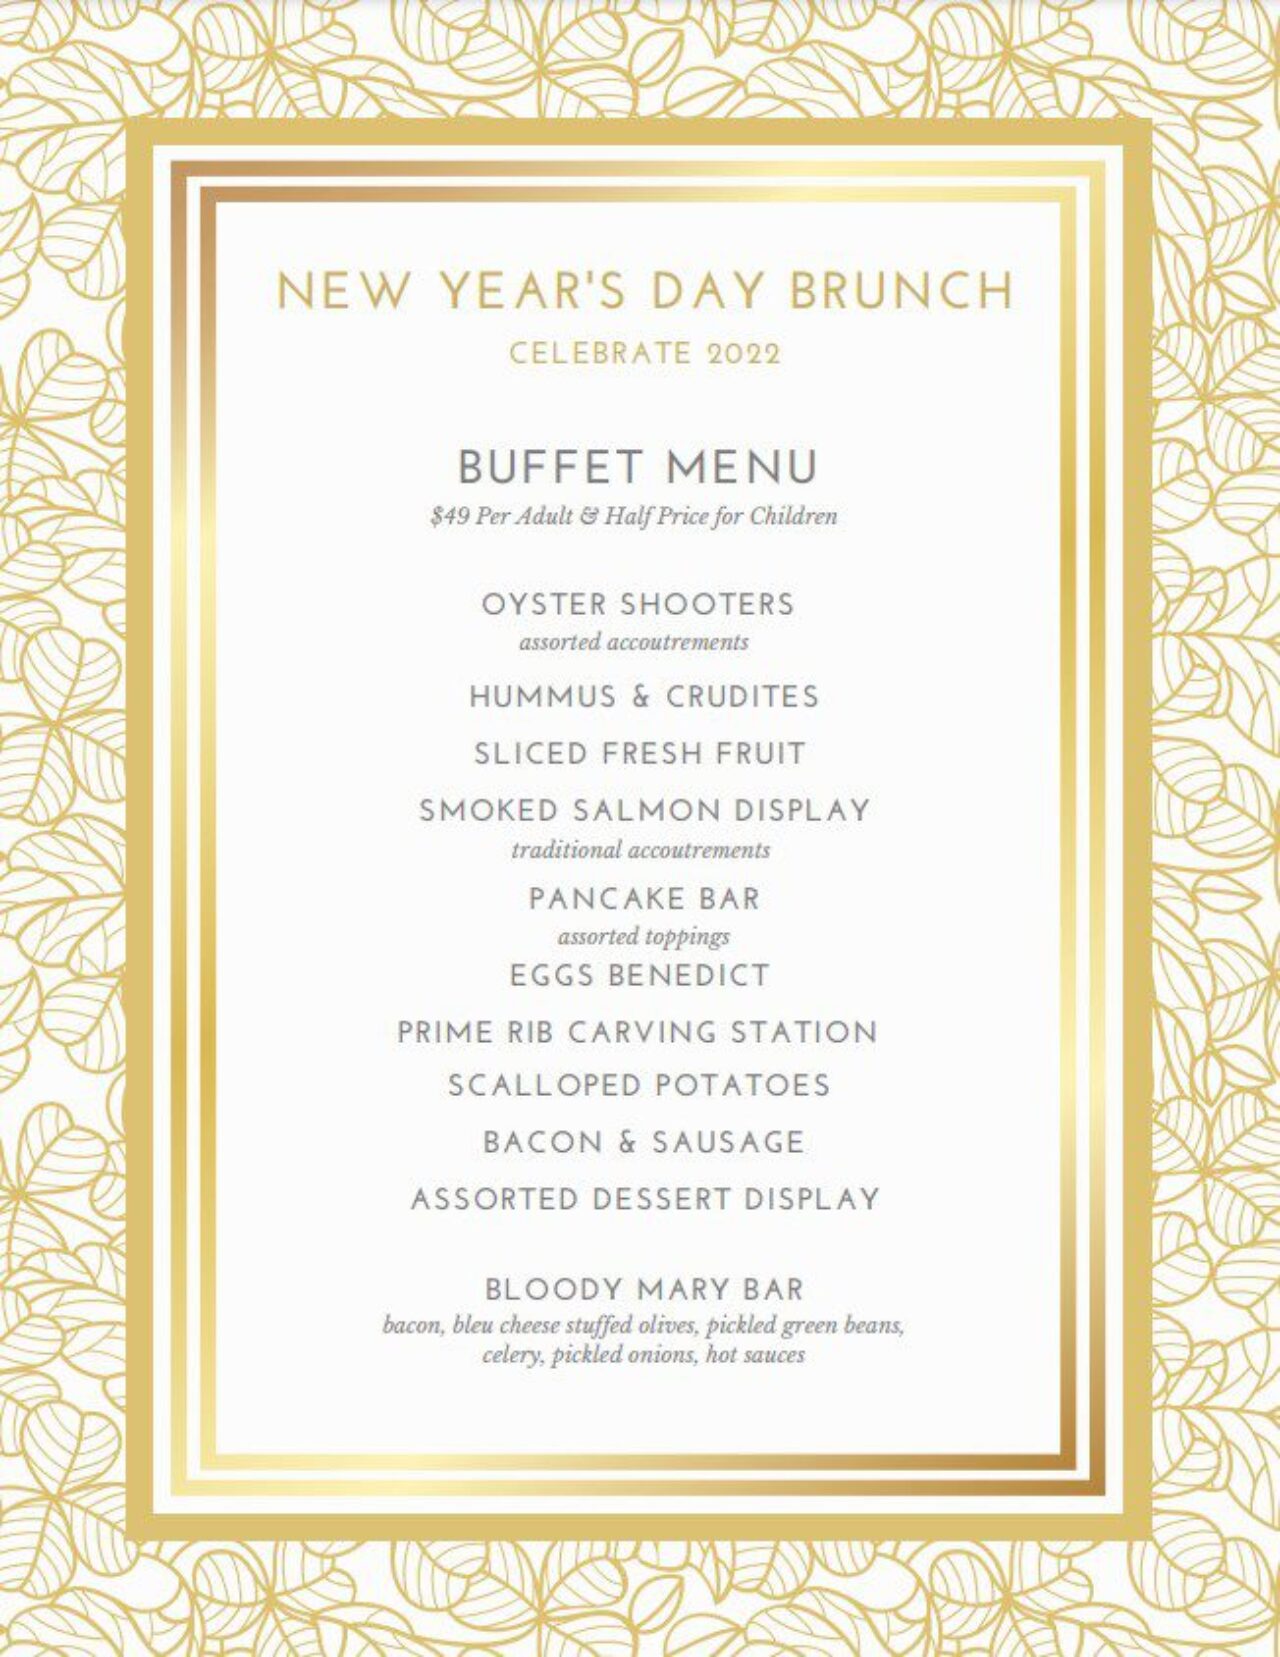 New Year's Day Brunch Menu at our Denver hotel, Clayton Members Club & Hotel